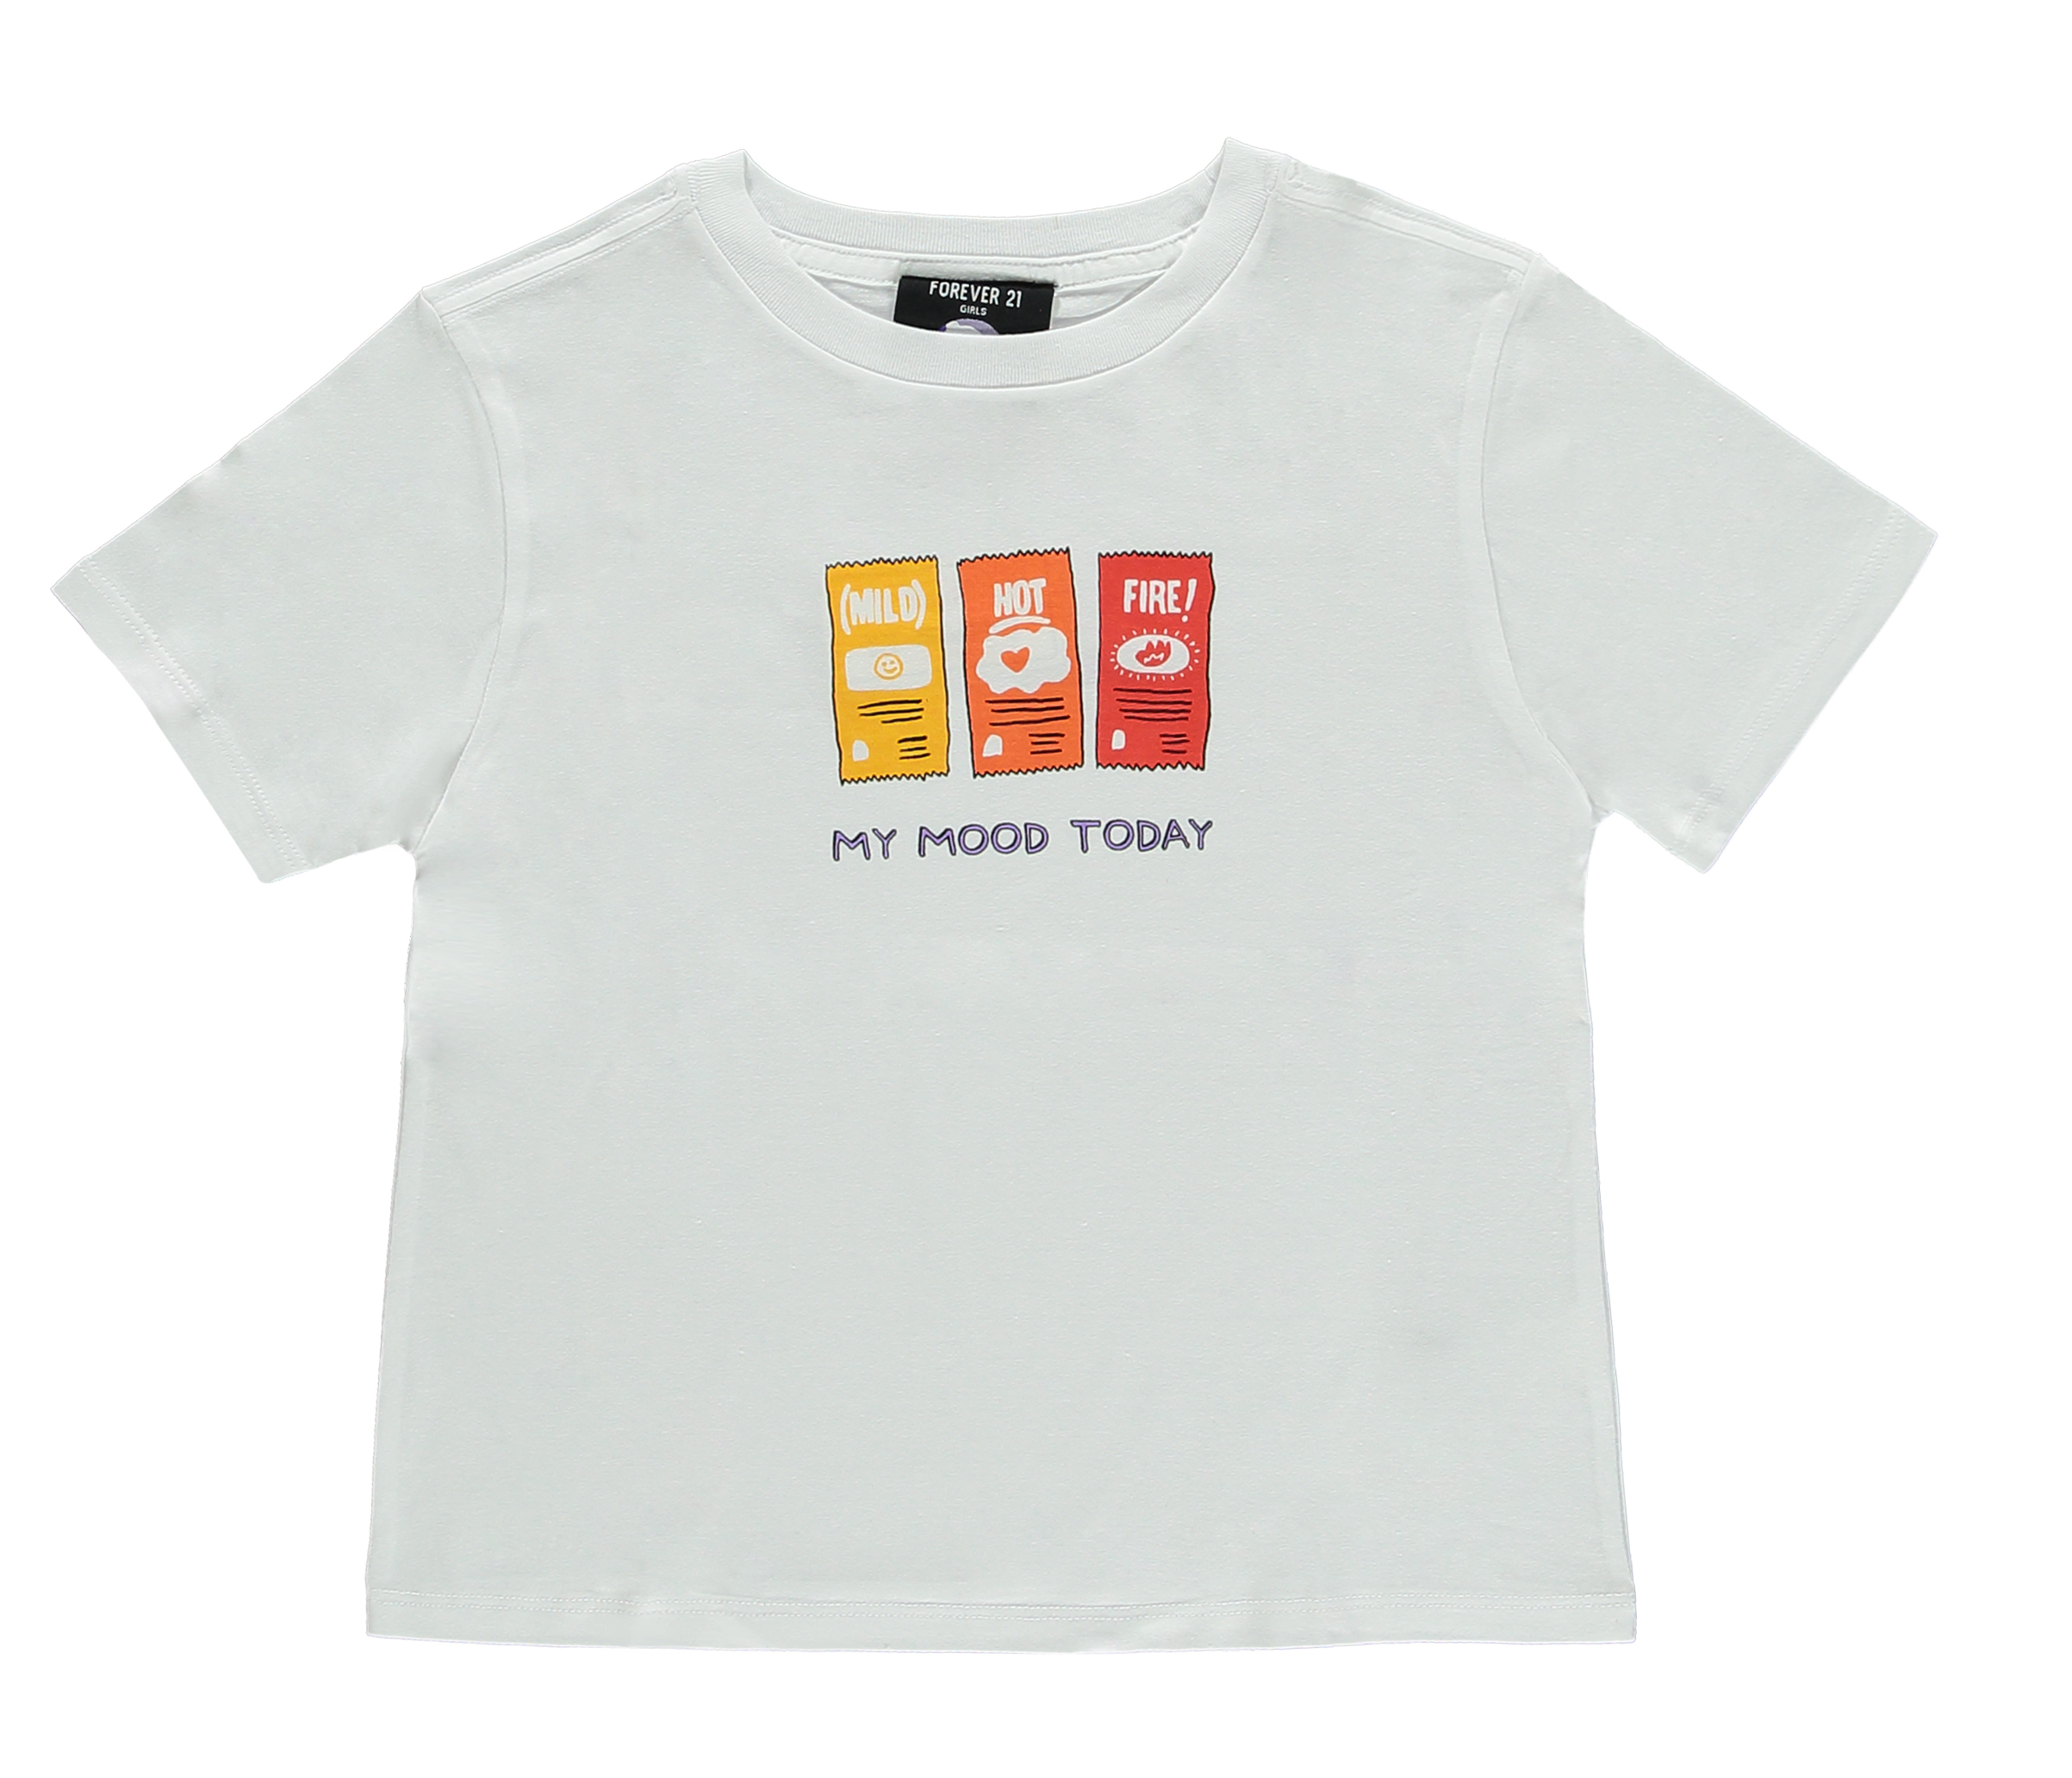 Taco Bell Hot Sauce Tee (Forever 21 x Taco Bell)